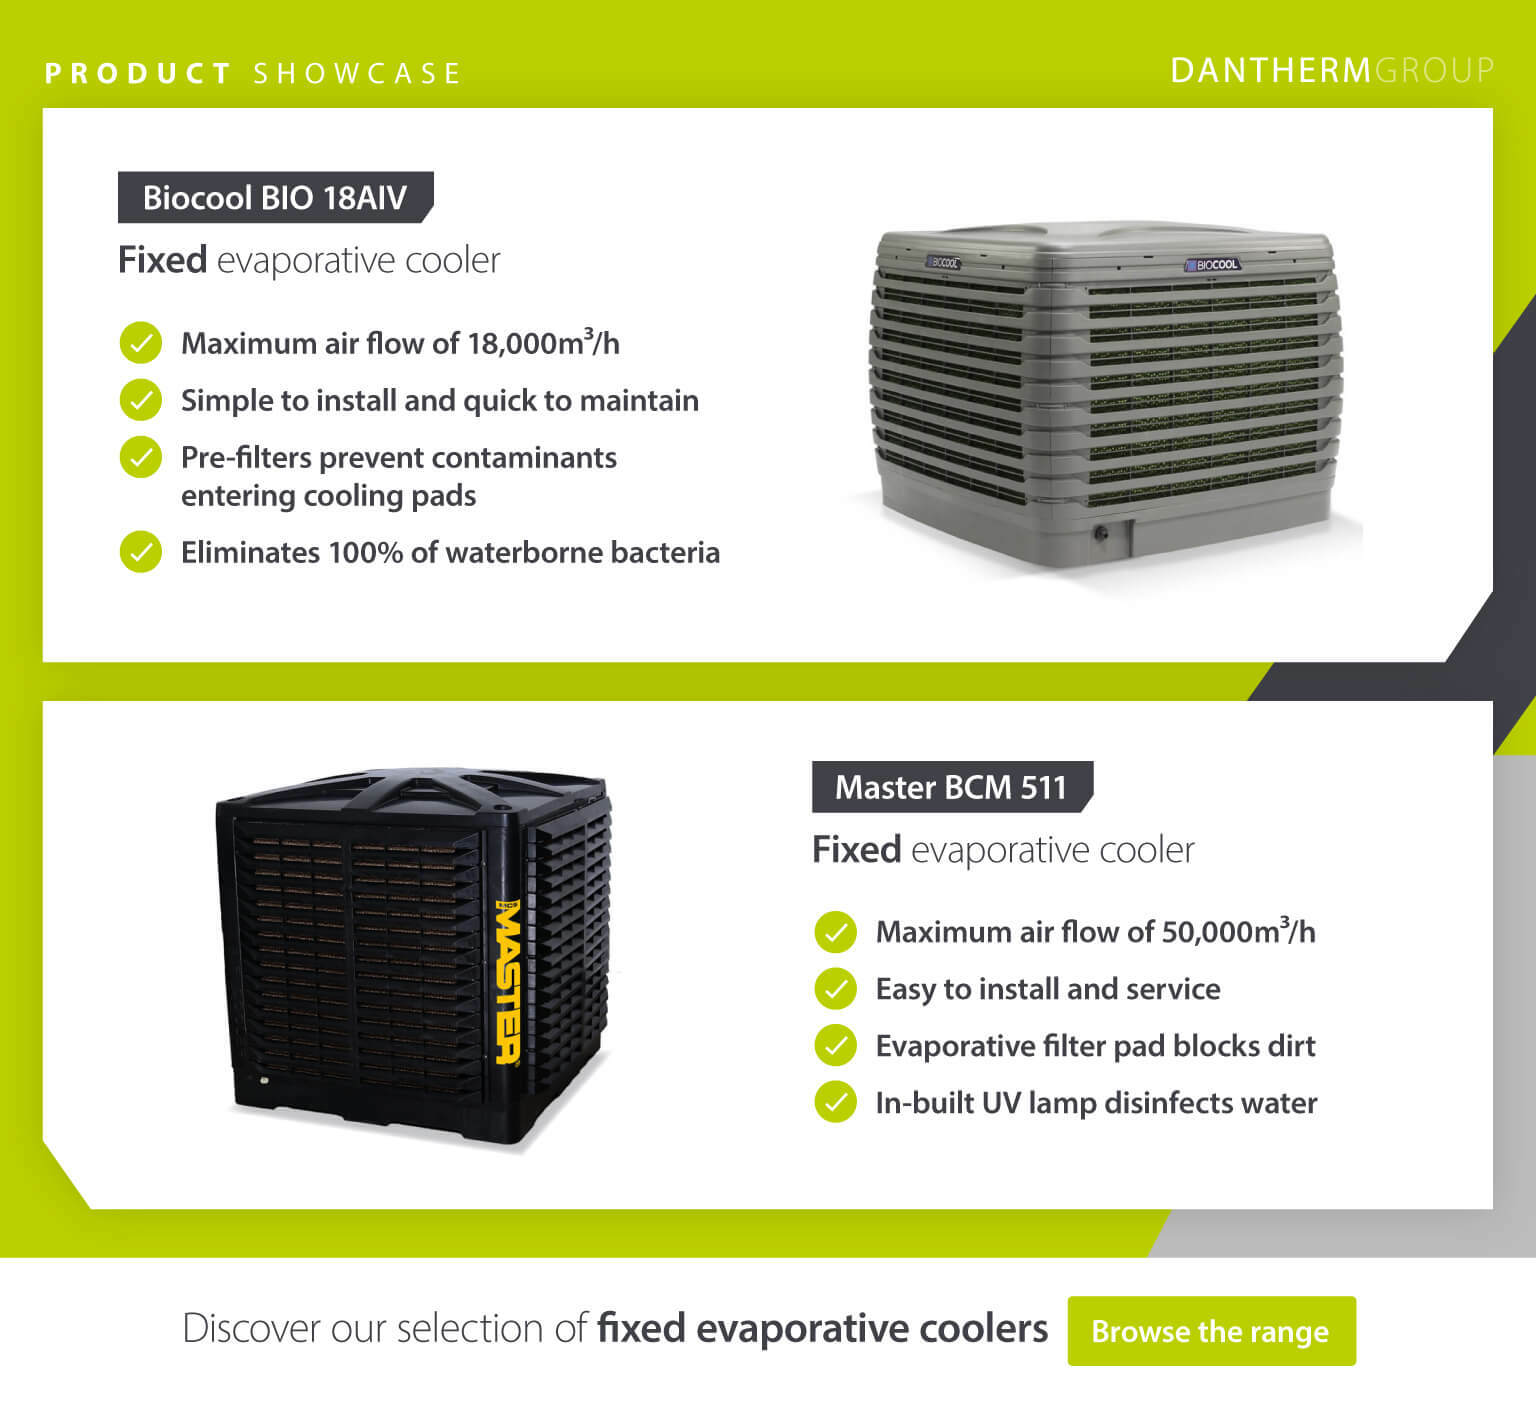 Product Showcase comparing 2 commercial evaporative coolers showing function and features information - Infographic image